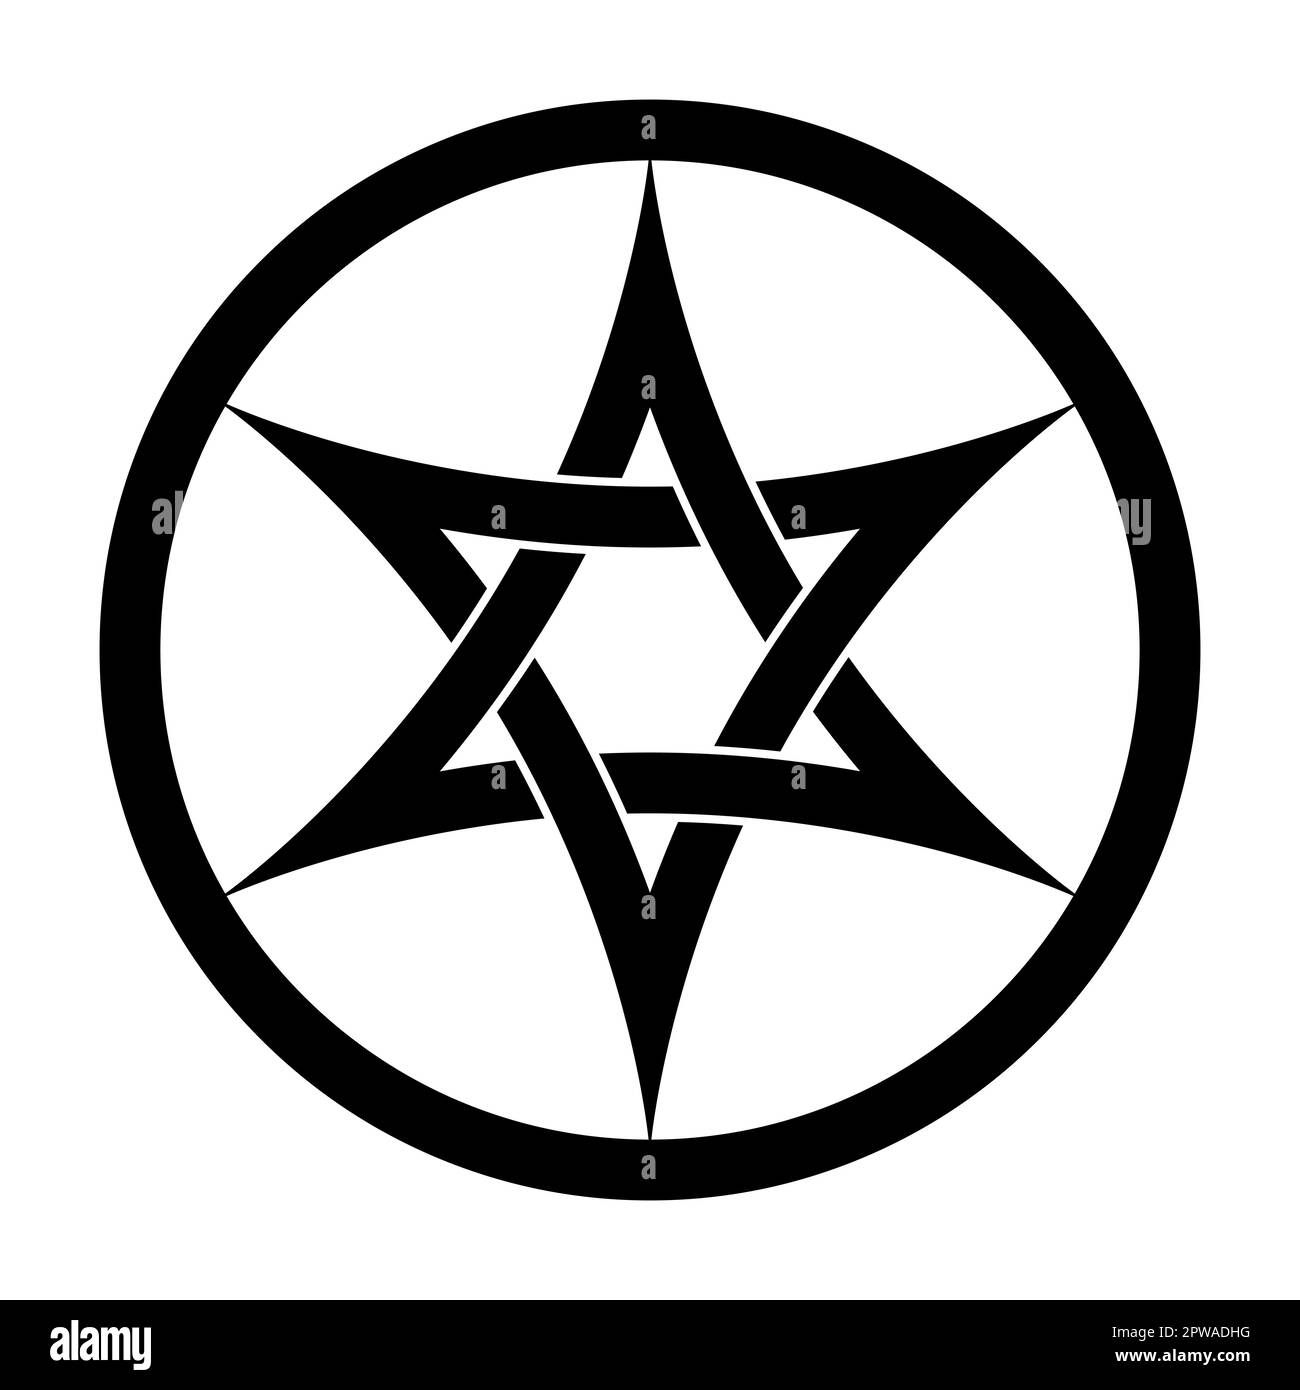 Hexagram with interlaced curved arcs, a six pointed star in a circle frame. Two interwoven arched triangles, based on the Seal of Solomon. Stock Photo